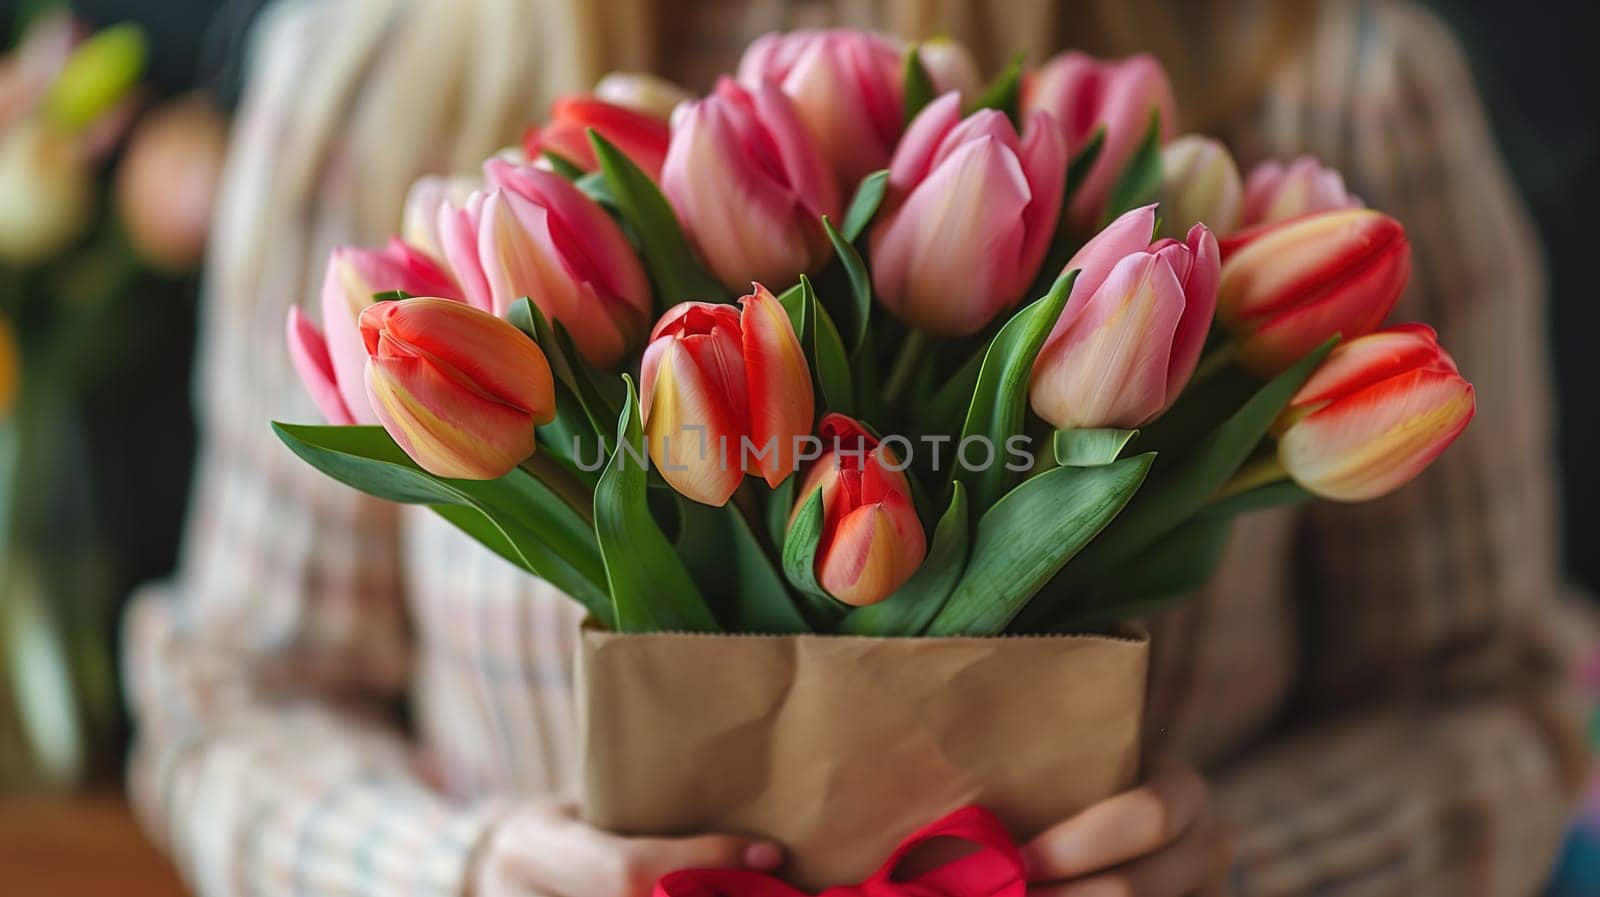 Person Holding Bouquet of Tulips by TRMK